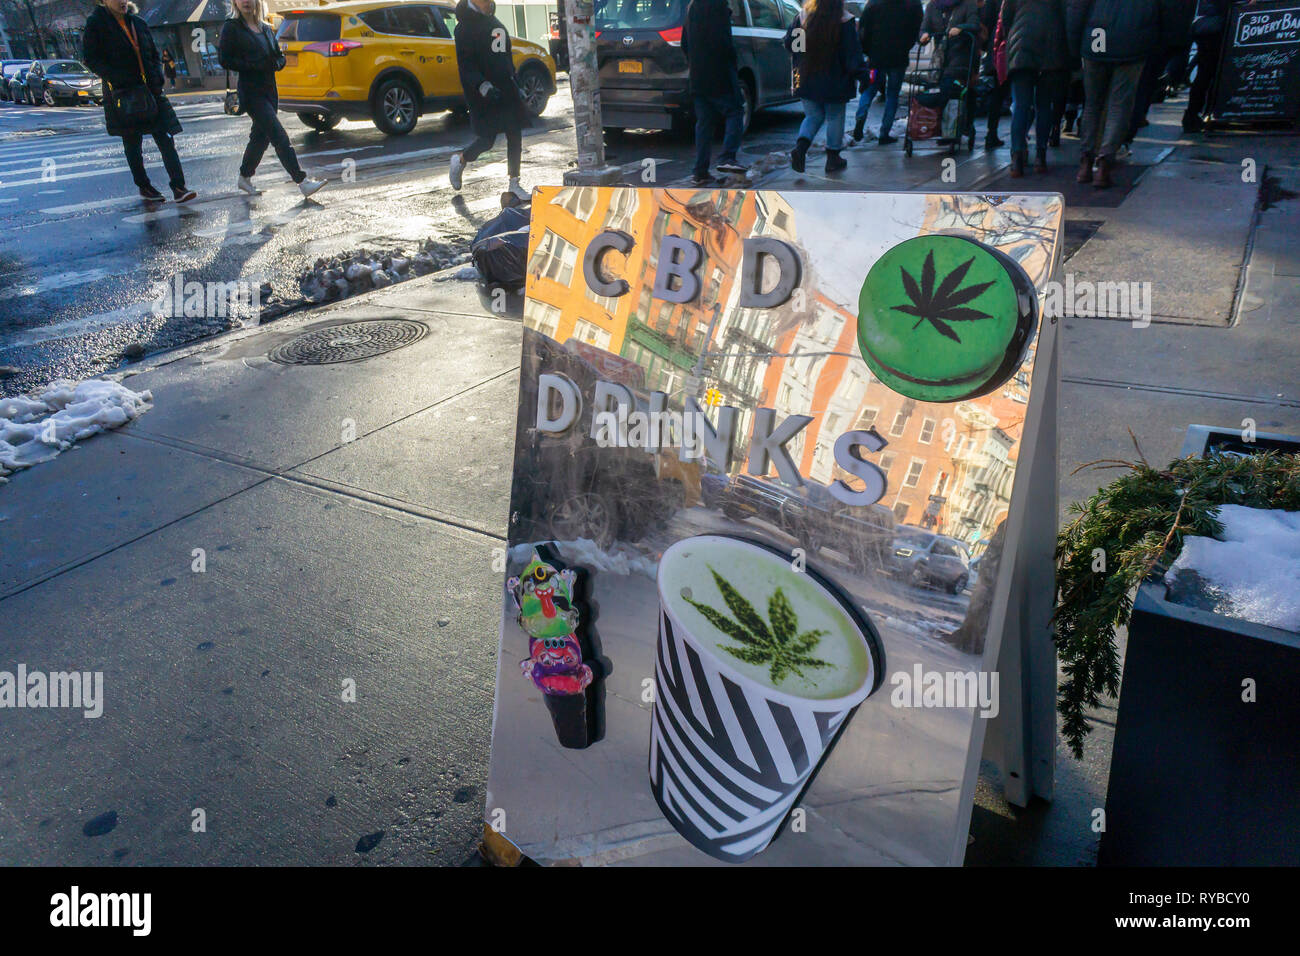 A cafe on the Lower East Side in New York advertises the availability of CBD infused beverages on its menu, seen on Saturday, March 2, 2019. CBD is the non-psychoactive component of marijuana as opposed to tetrahydrocannabinol (THC) which is the stuff that gets you high, not to mention being illegal at this time. (Â© Richard B. Levine) Stock Photo